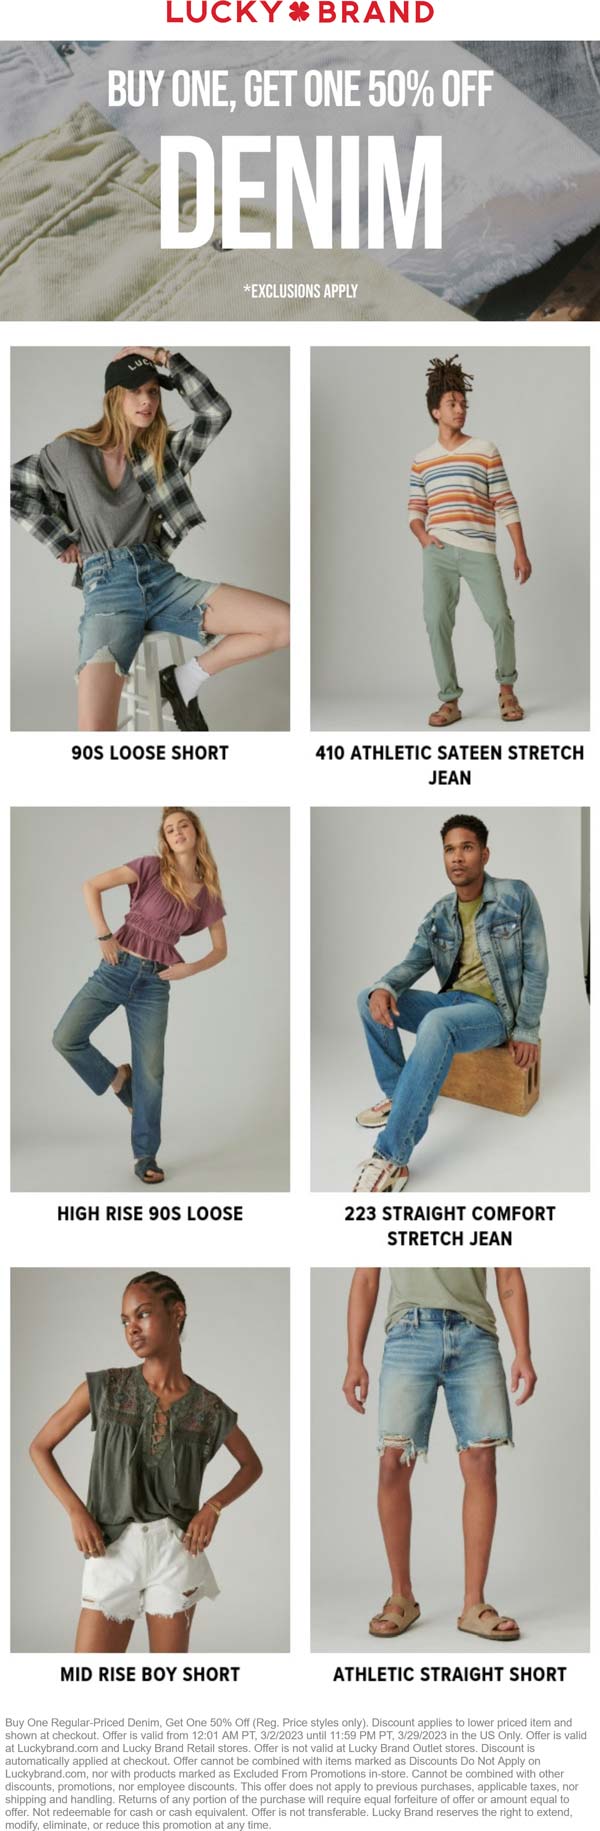 Lucky Brand stores Coupon  Second denim 50% off at Lucky Brand, ditto online #luckybrand 